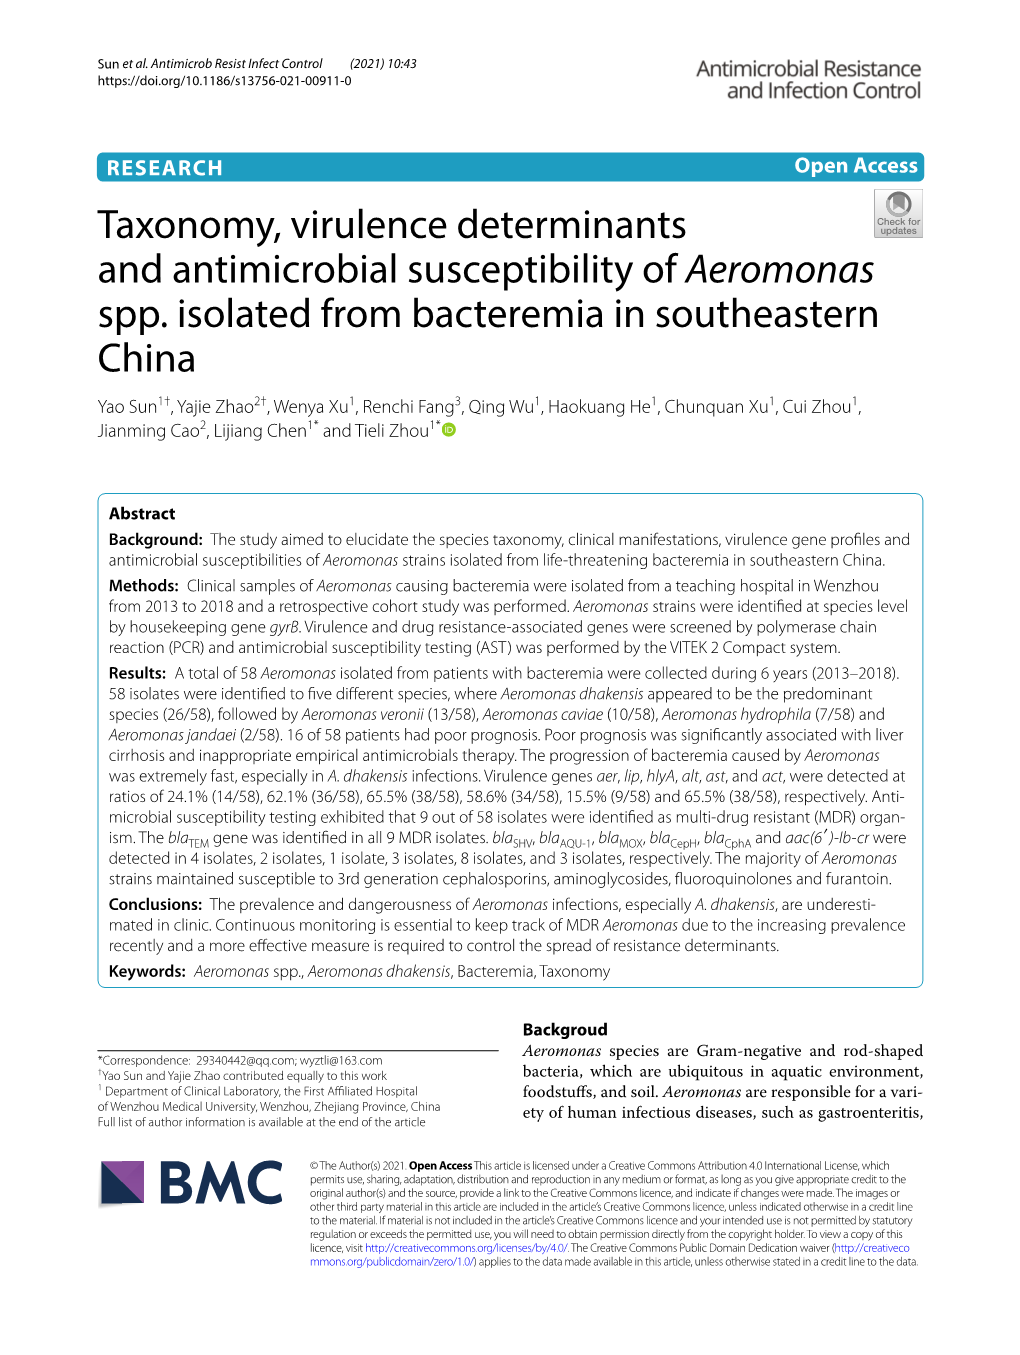 Taxonomy, Virulence Determinants and Antimicrobial Susceptibility of Aeromonas Spp